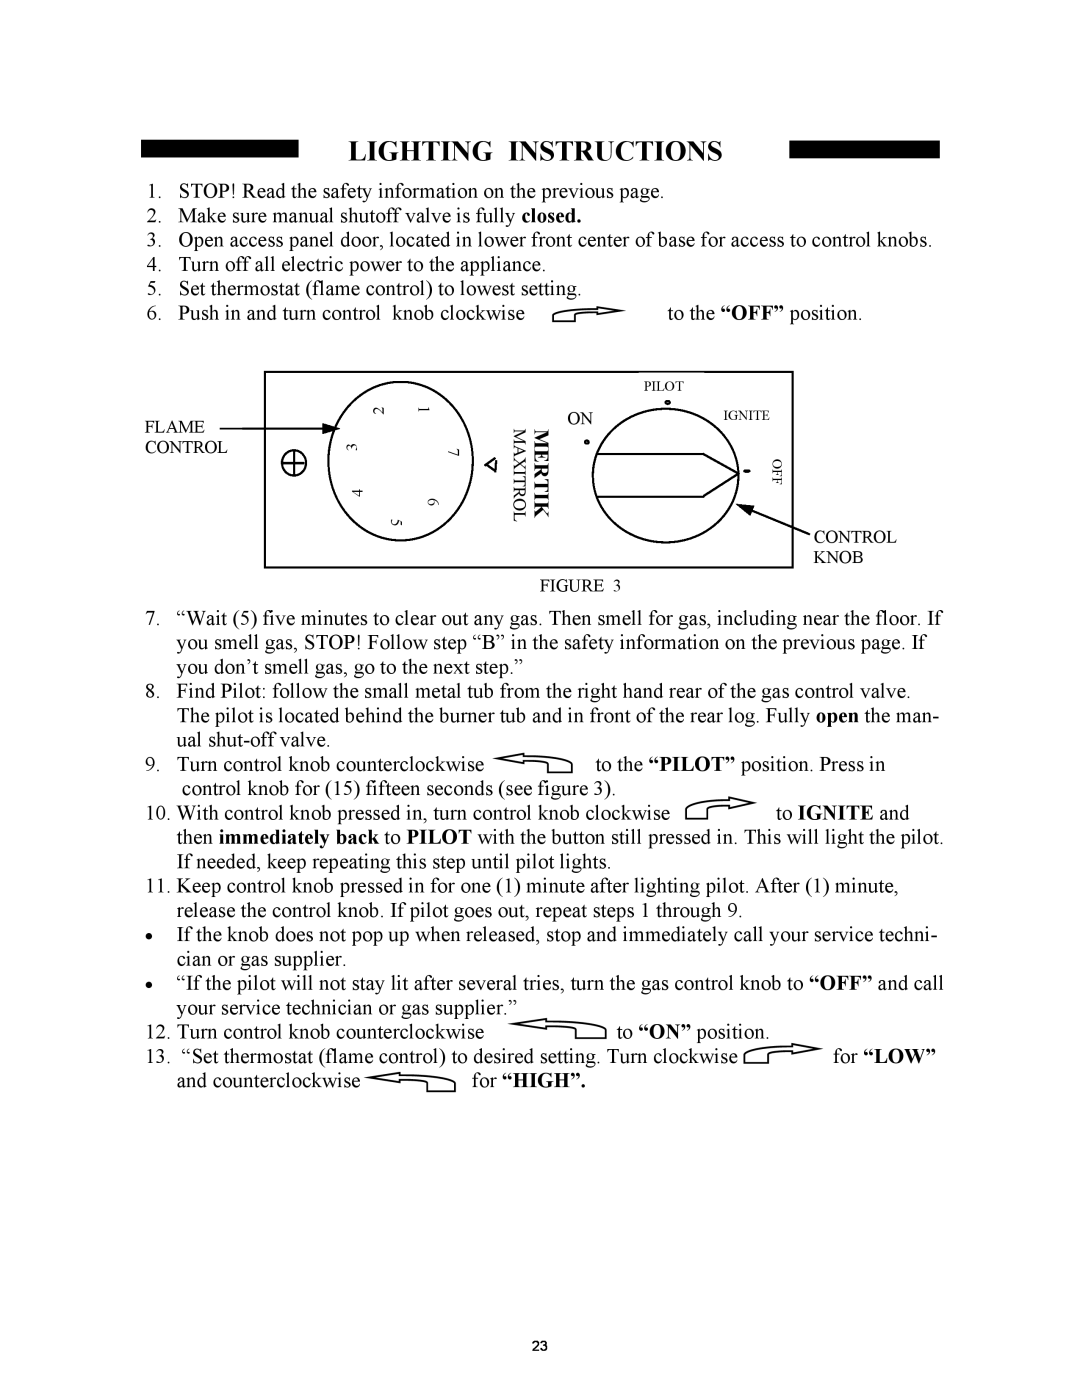 New Buck Corporation 1127B manual Lighting Instructions, to IGNITE and, for “LOW”, for “HIGH” 